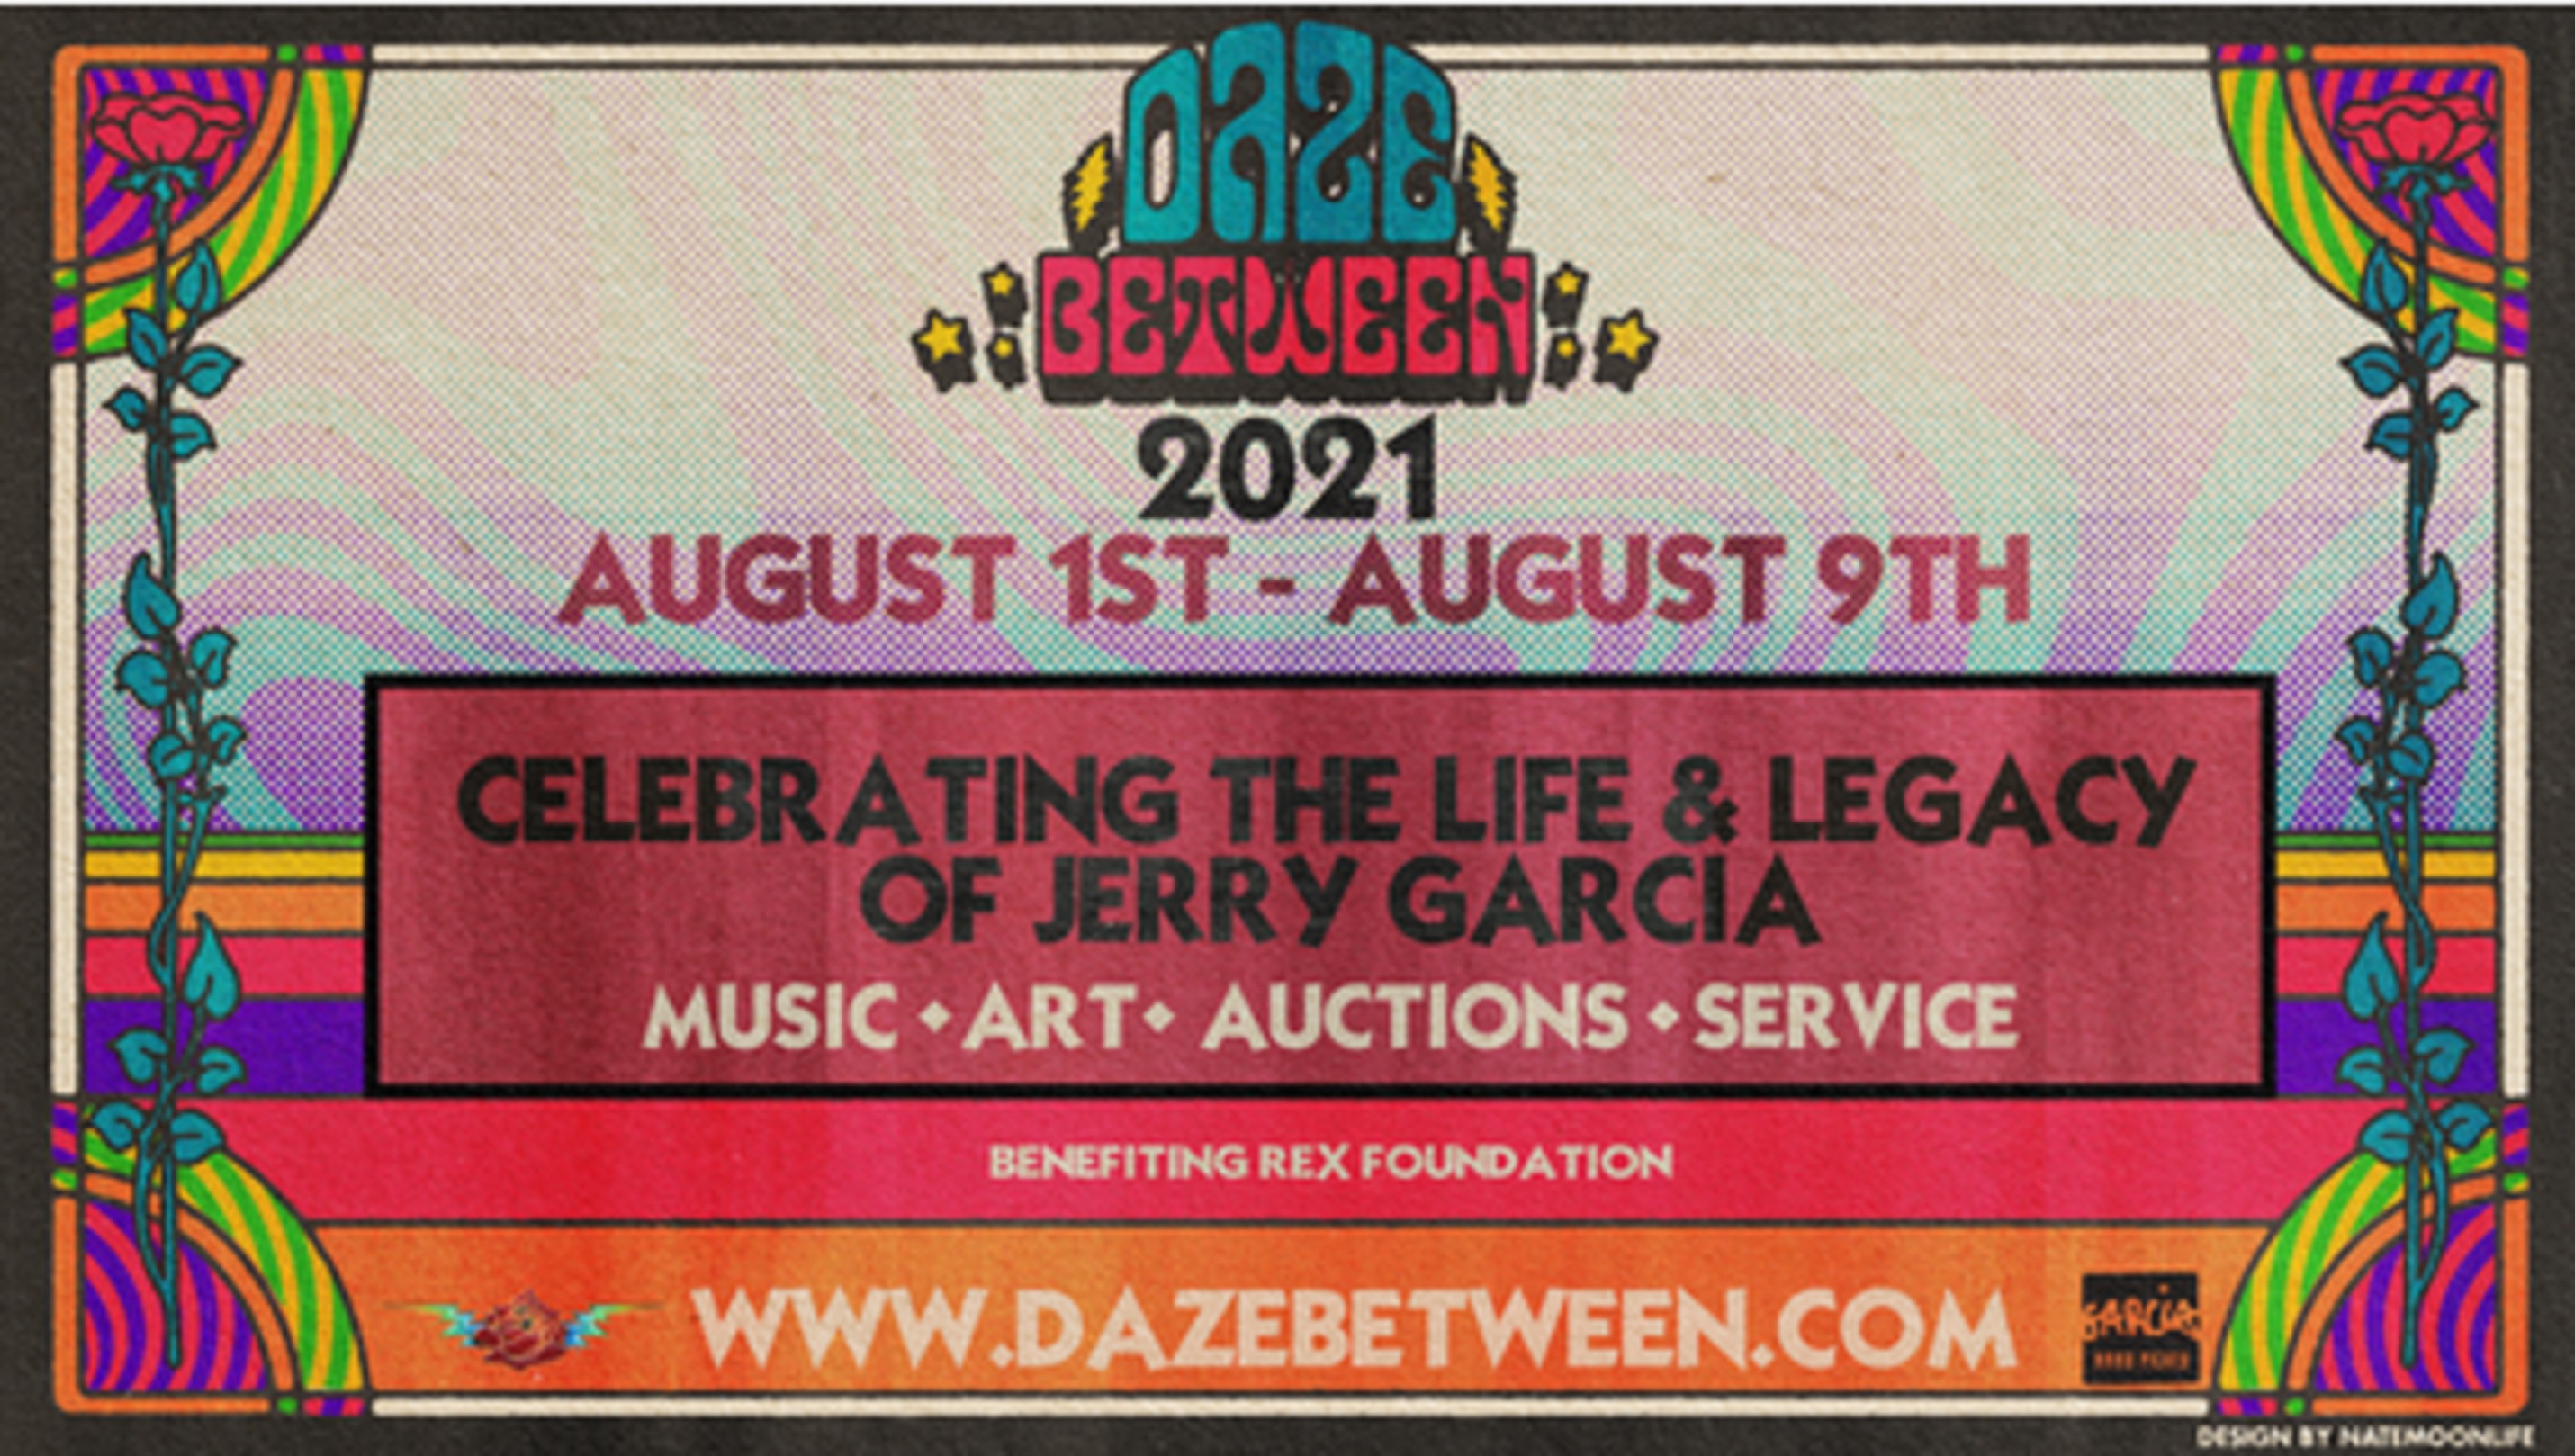 Daze Between Returns as a Hybrid Event with Live Shows, Livestreams, Daze of Service, MLB Activations and more